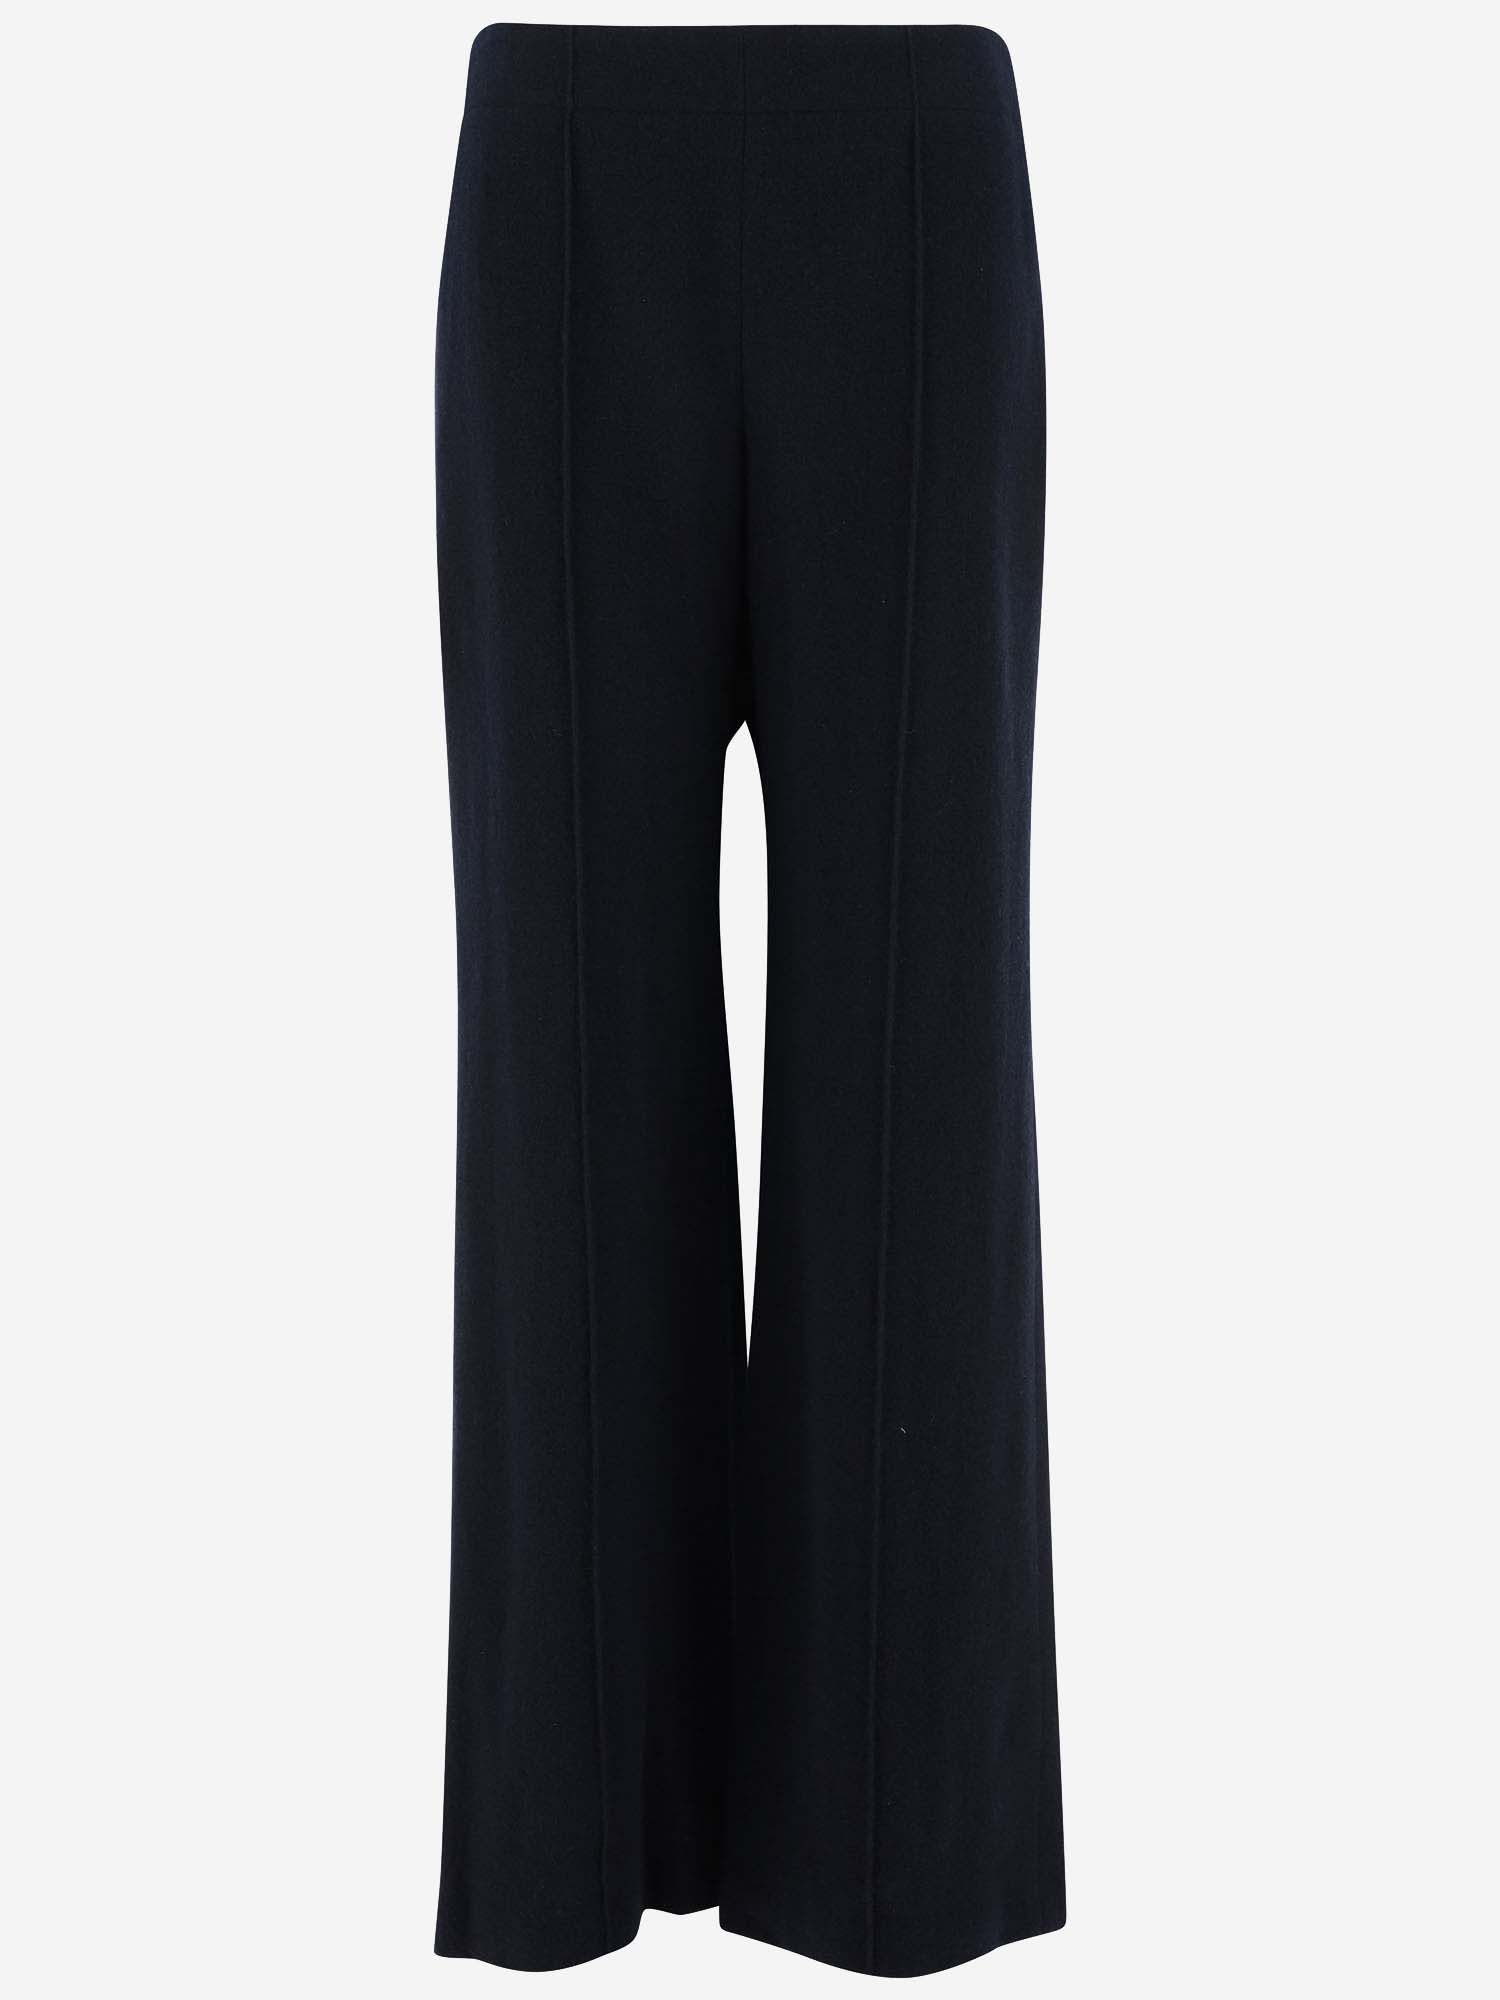 CHLOÉ WOOL AND CASHMERE BLEND PANTS